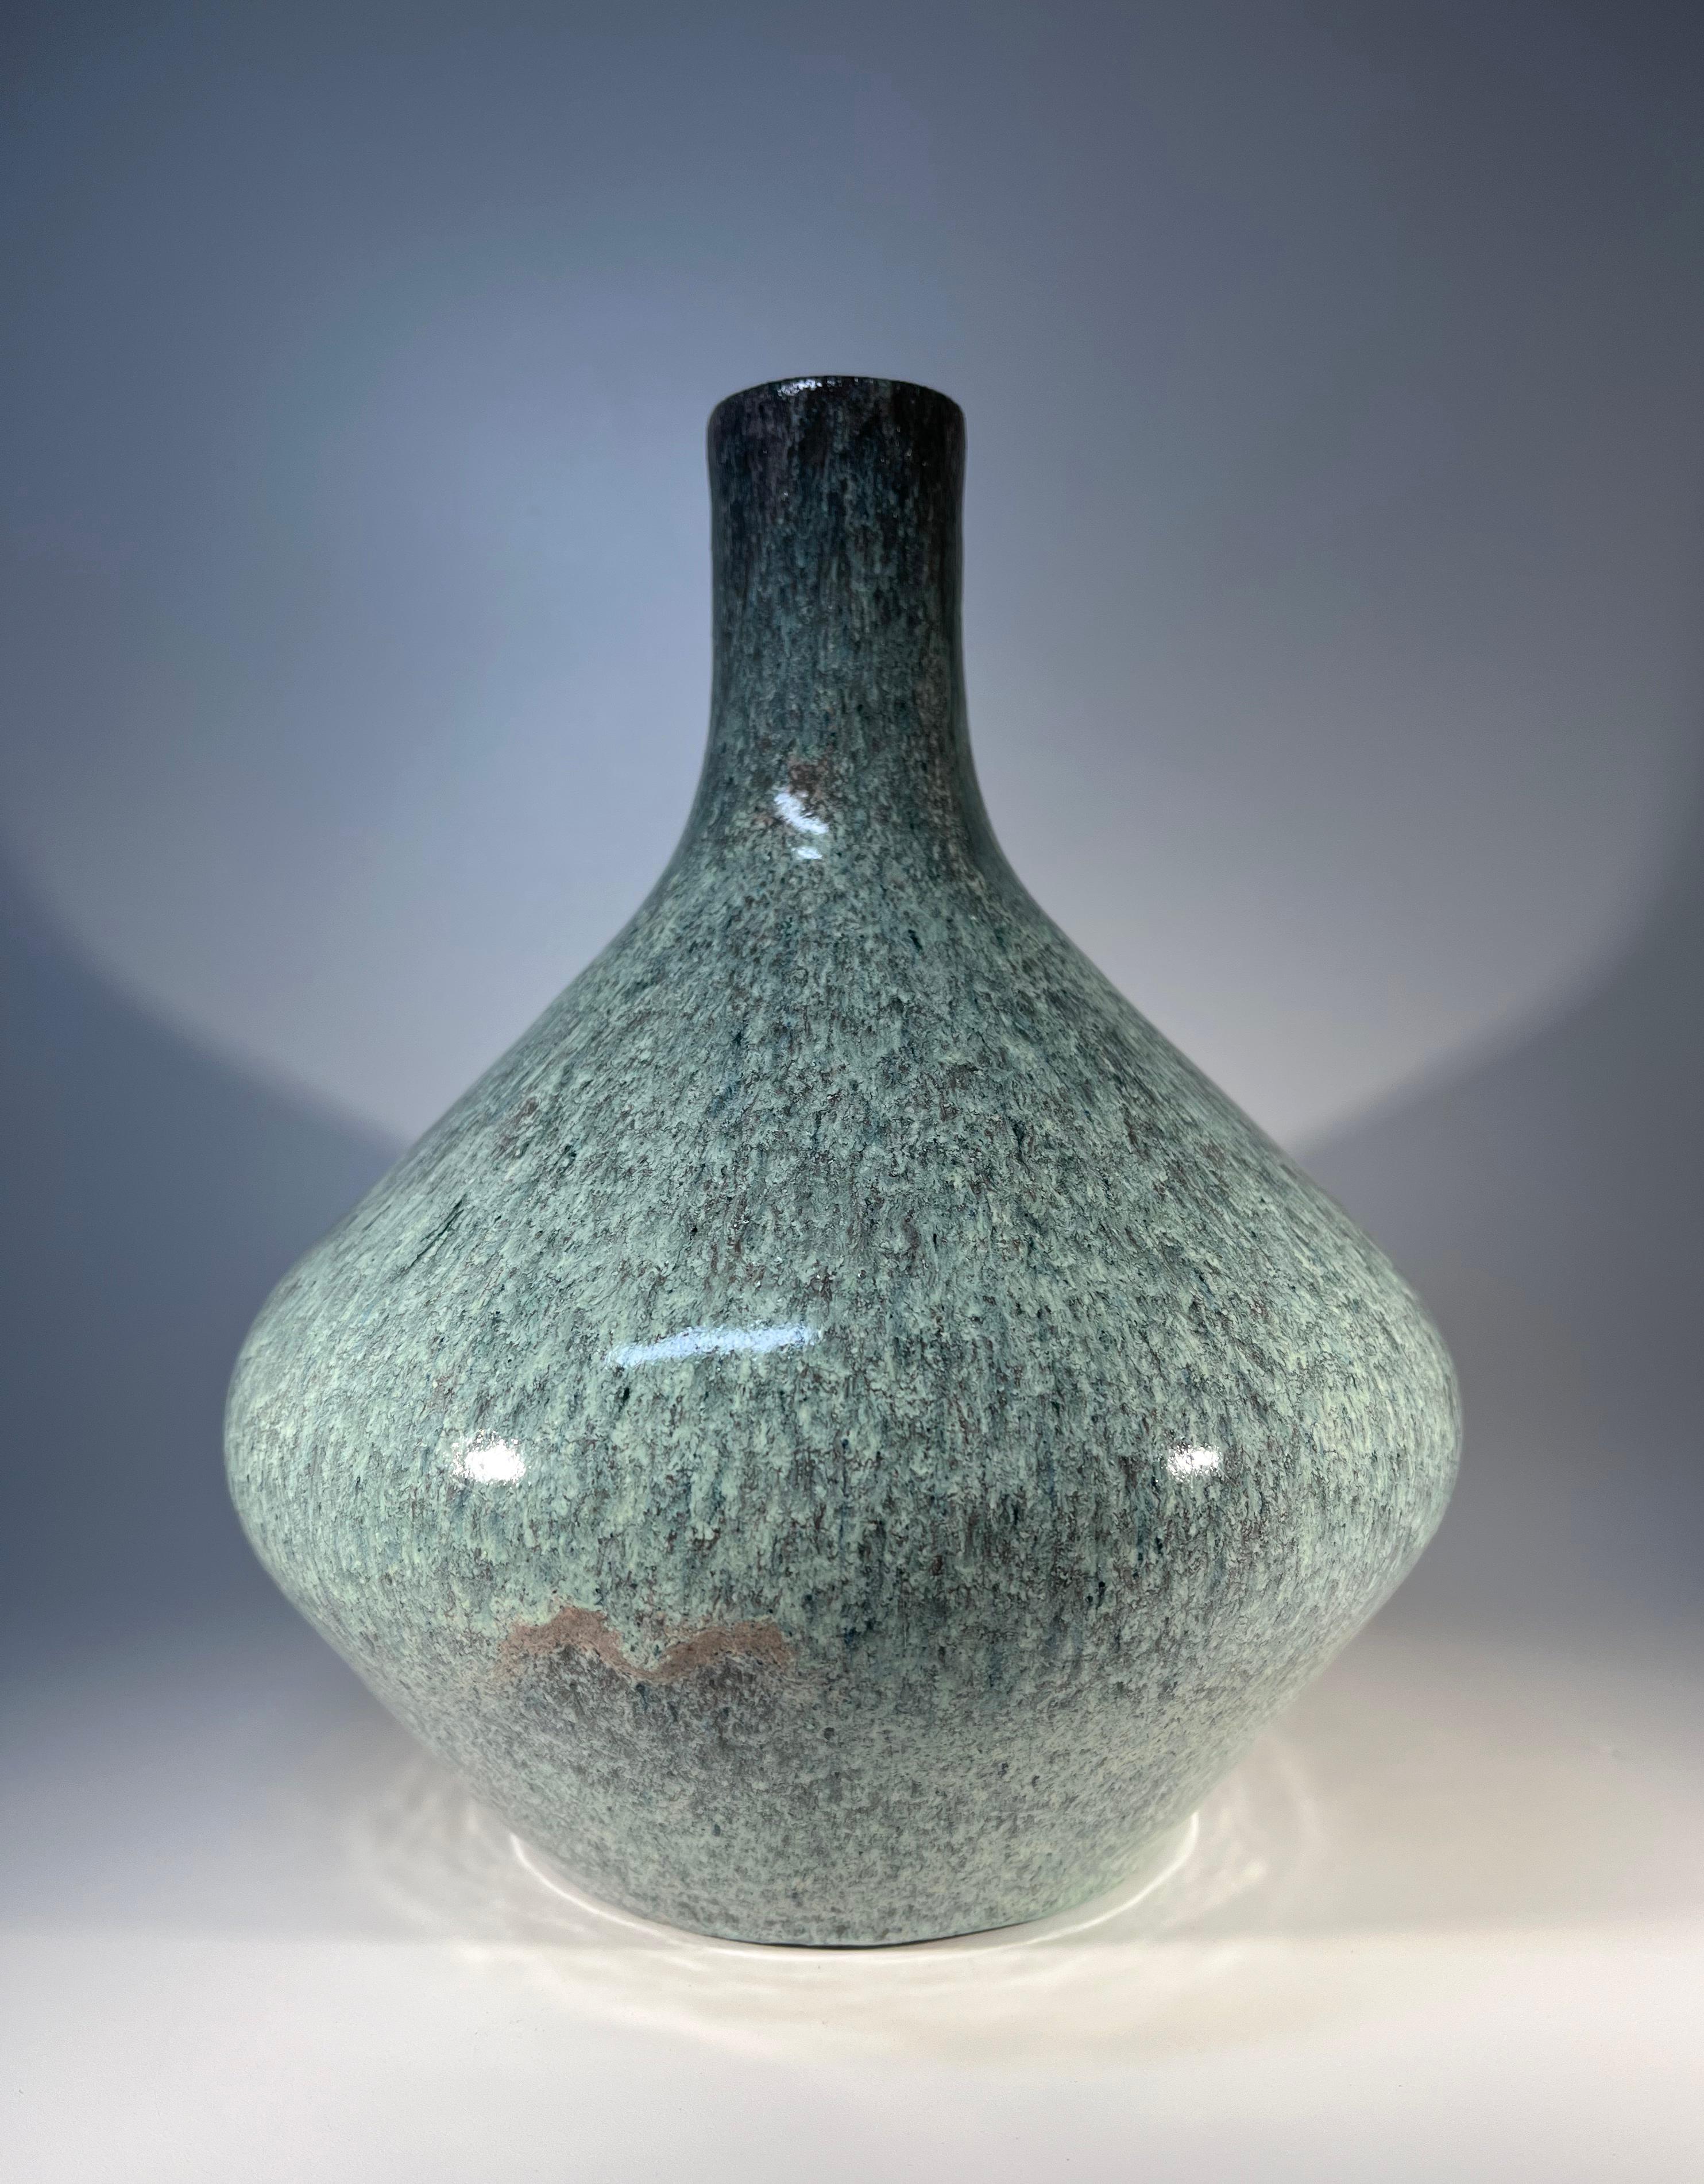 Tactile in shape, with a superb duck egg blue mottled glaze - teardrop ceramic stoneware vase by Accolay, France
Classic weighty form with a commanding edge
Circa 1960's
Signed Accolay to base
Height 9 inch, Diameter 7 inch
In excellent condition